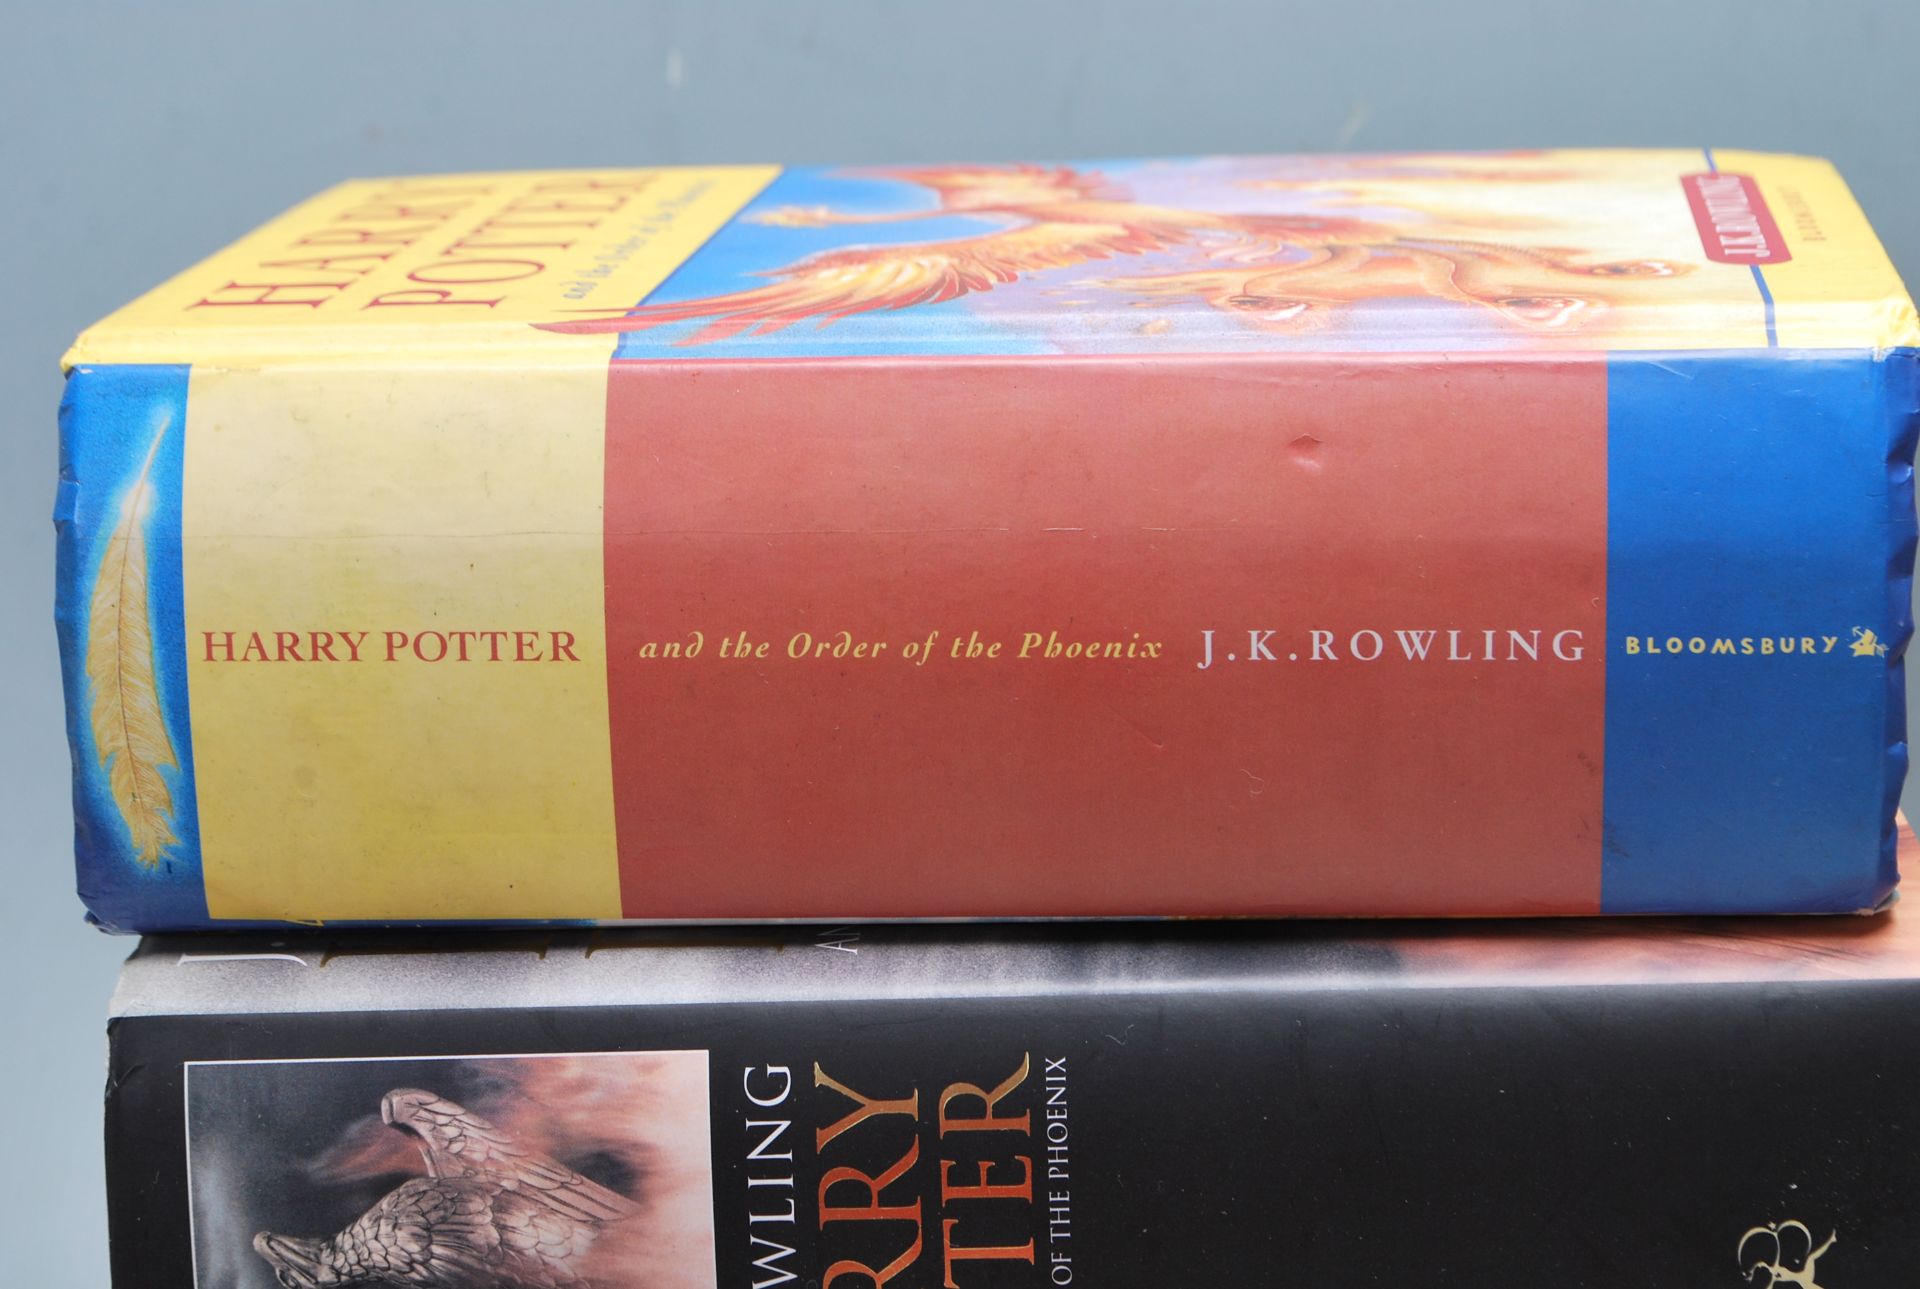 HARRY POTTER - J.K. ROWLING - FIRST EDITION BOOKS - BLOOMSBURY - Image 5 of 7